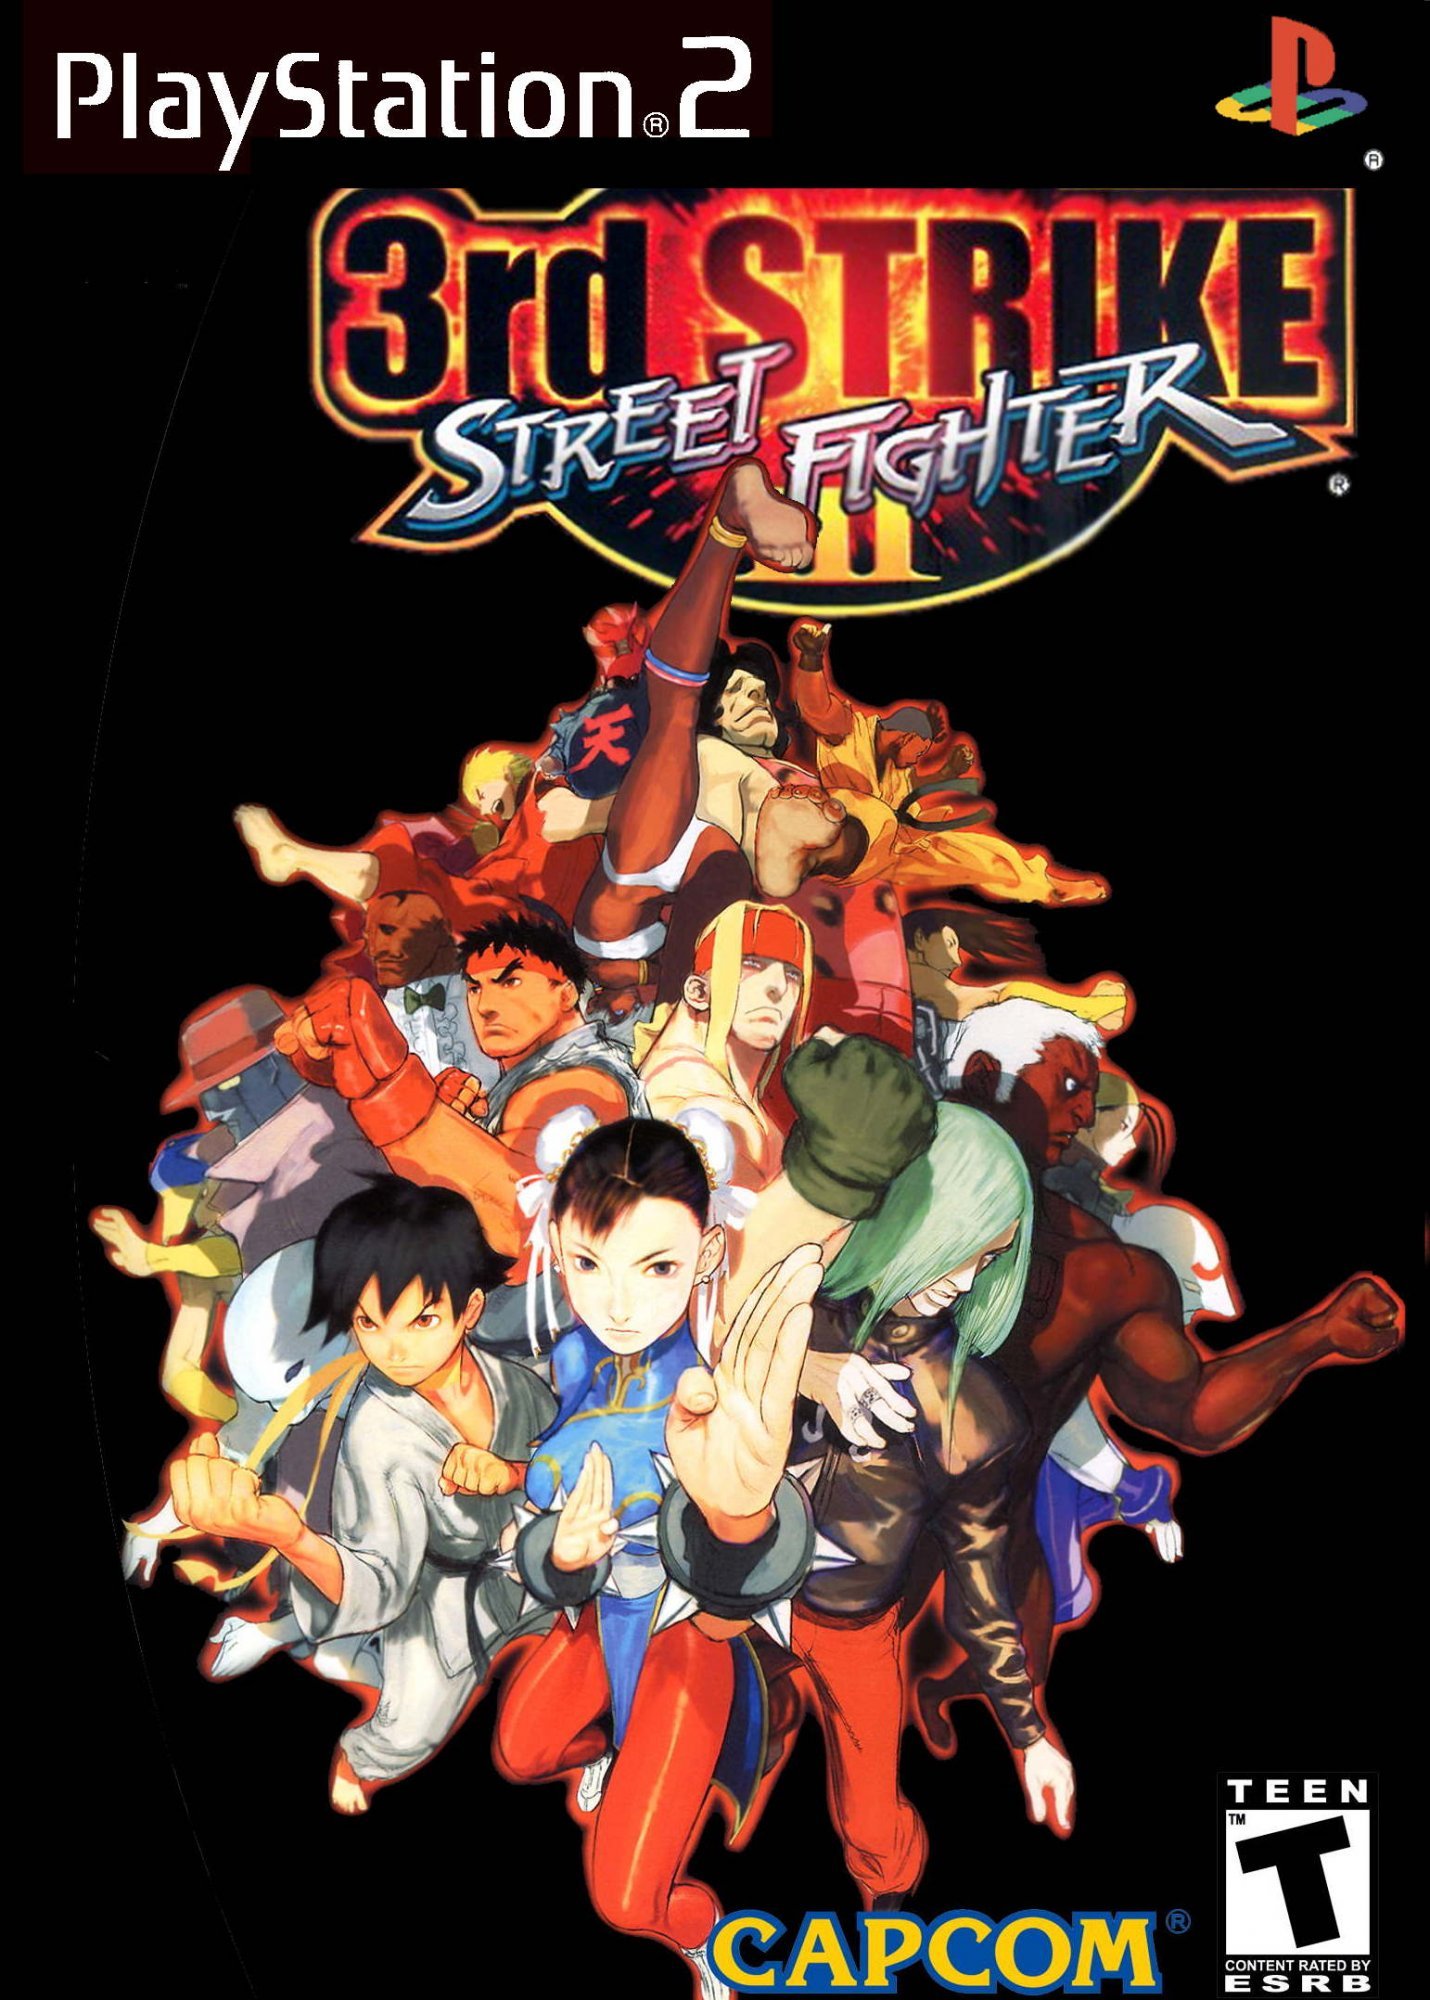 Street Fighter III: 3rd Strike – Fight for the Future